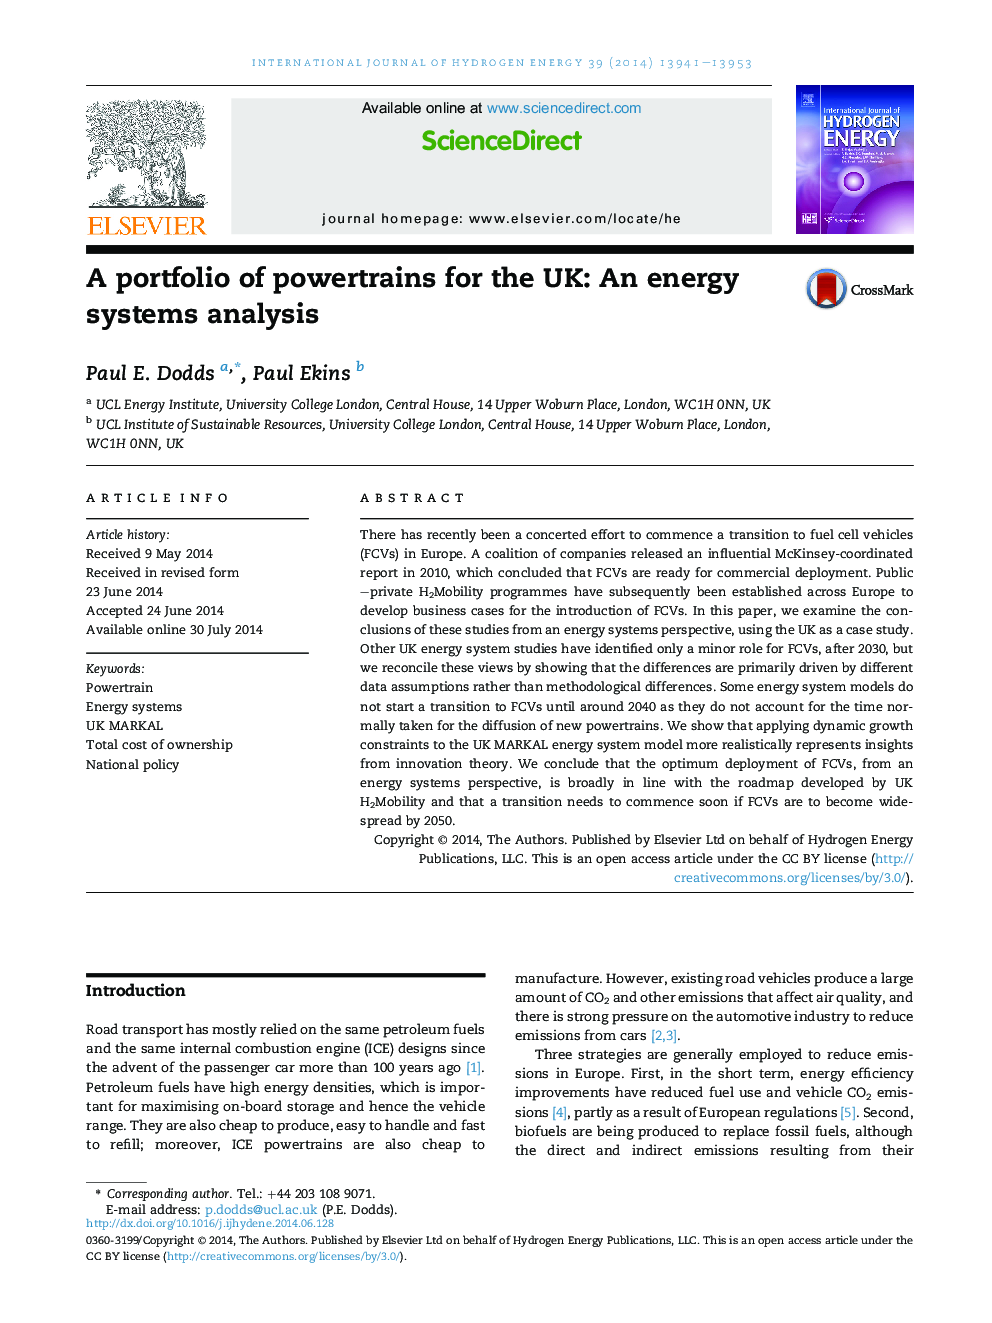 A portfolio of powertrains for the UK: An energy systems analysis